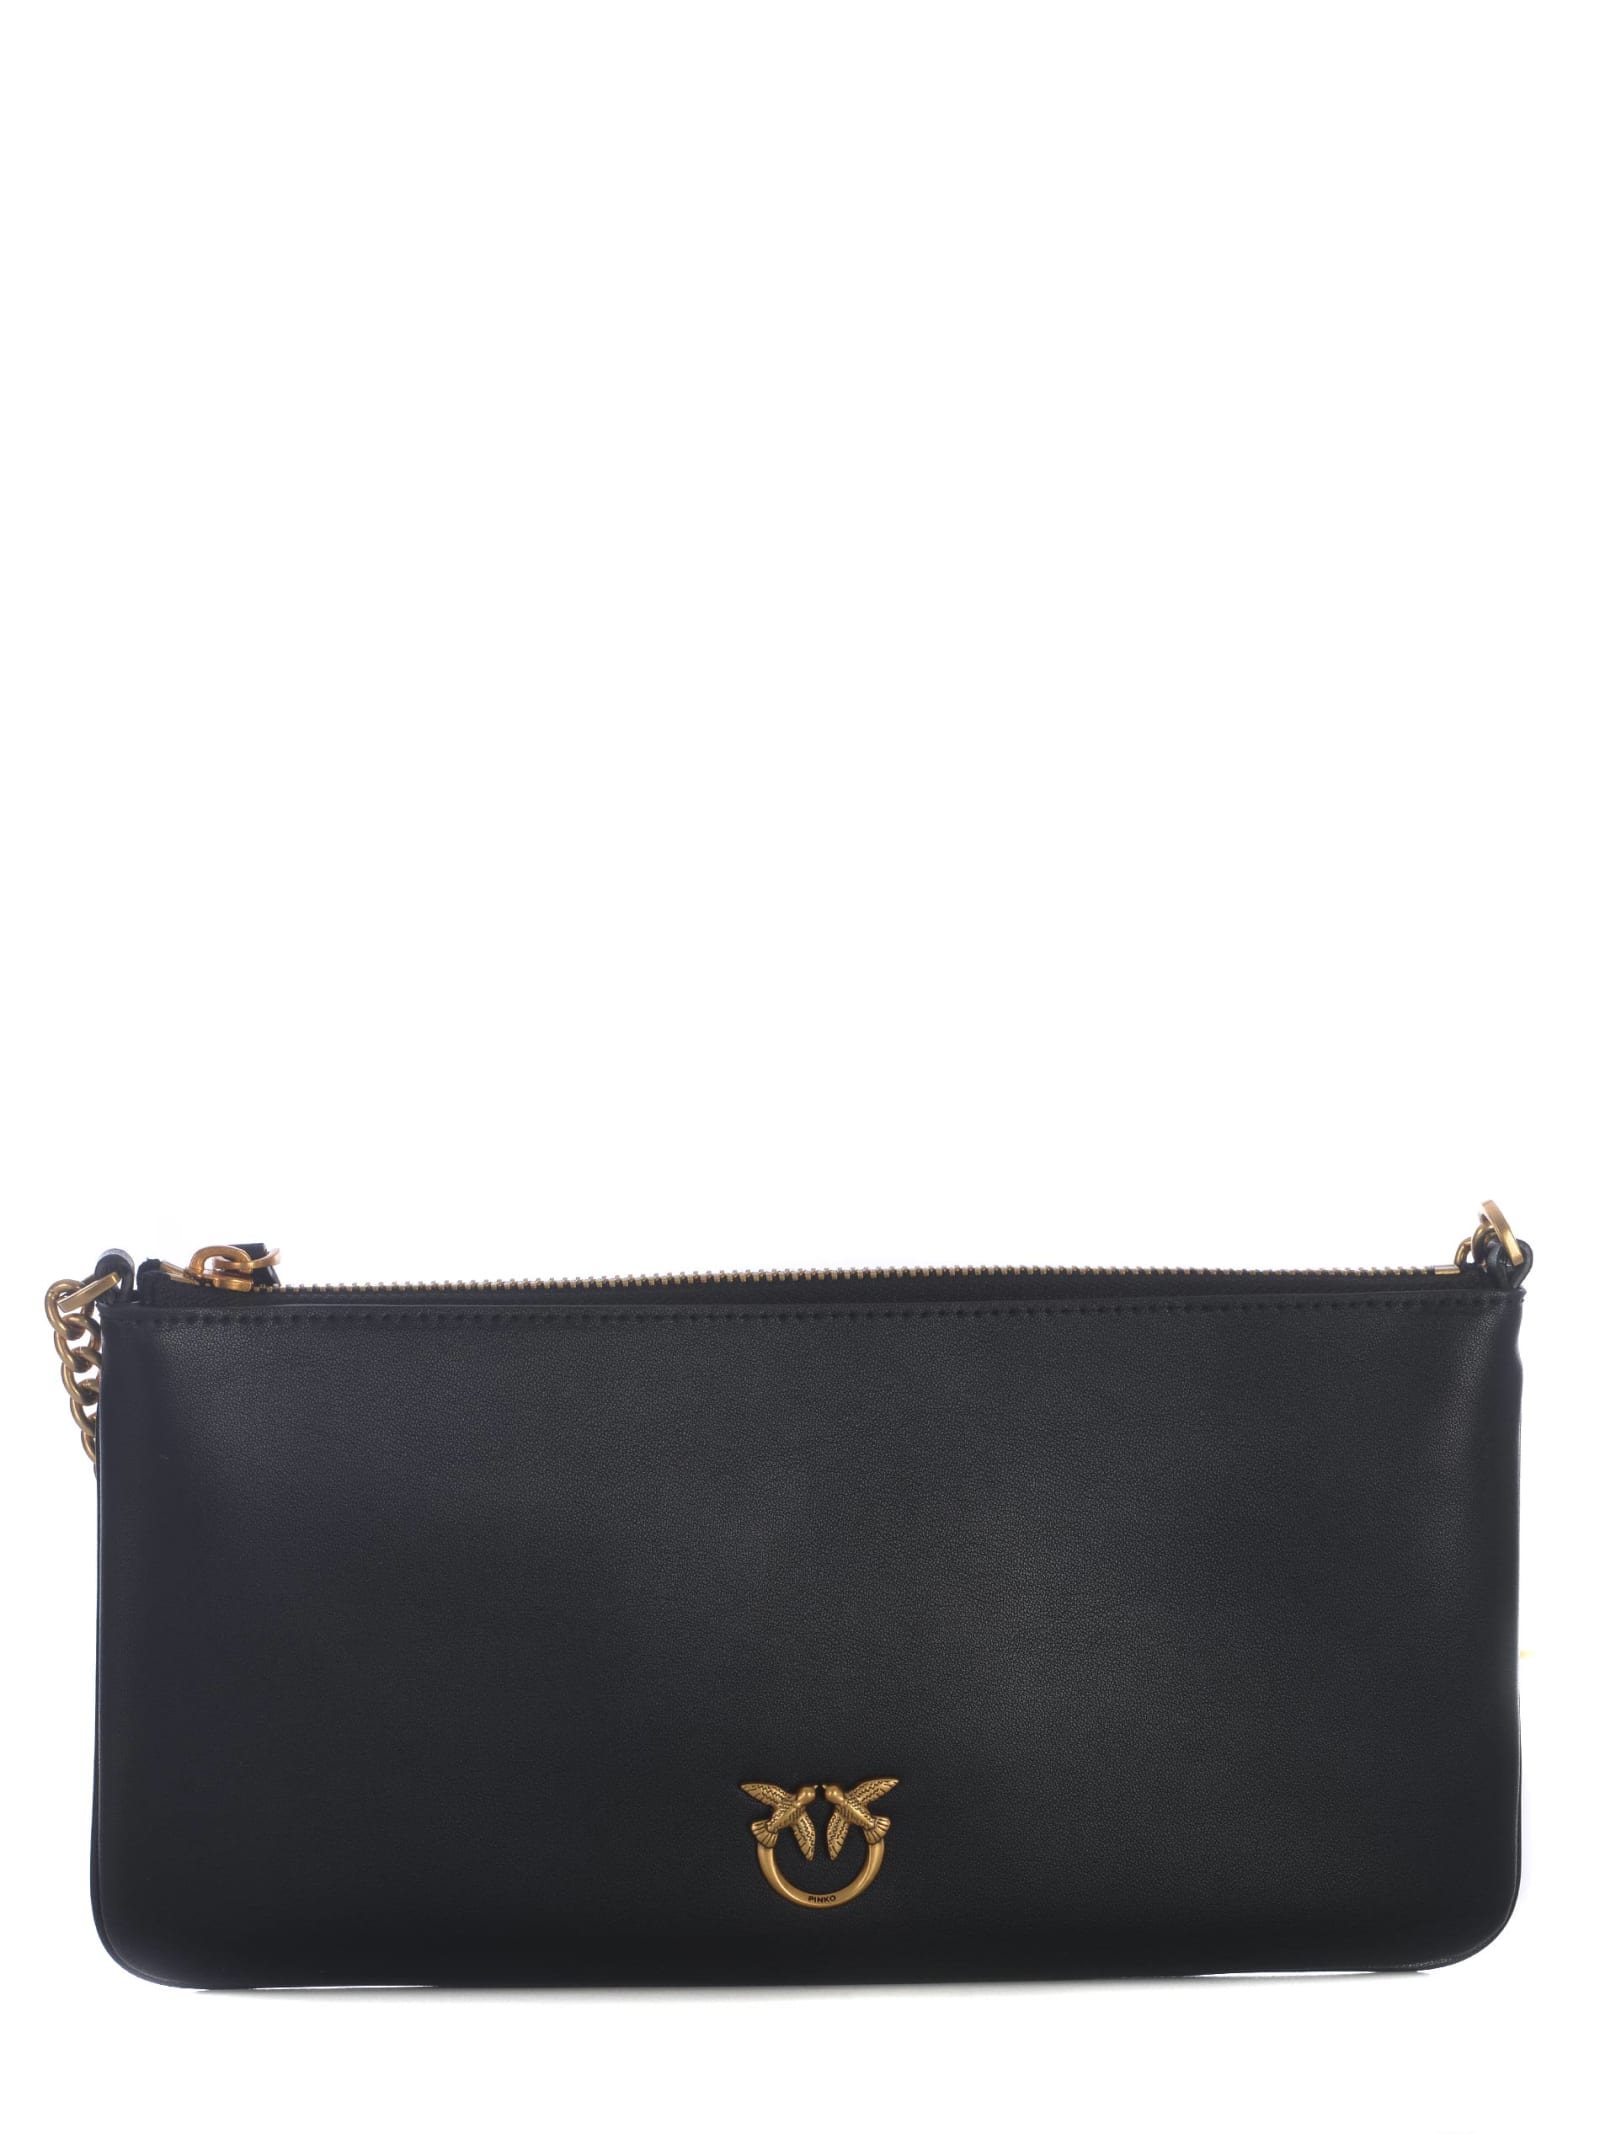 Pinko Bag  Horizontal Flat Made Of Soft Leather In Black